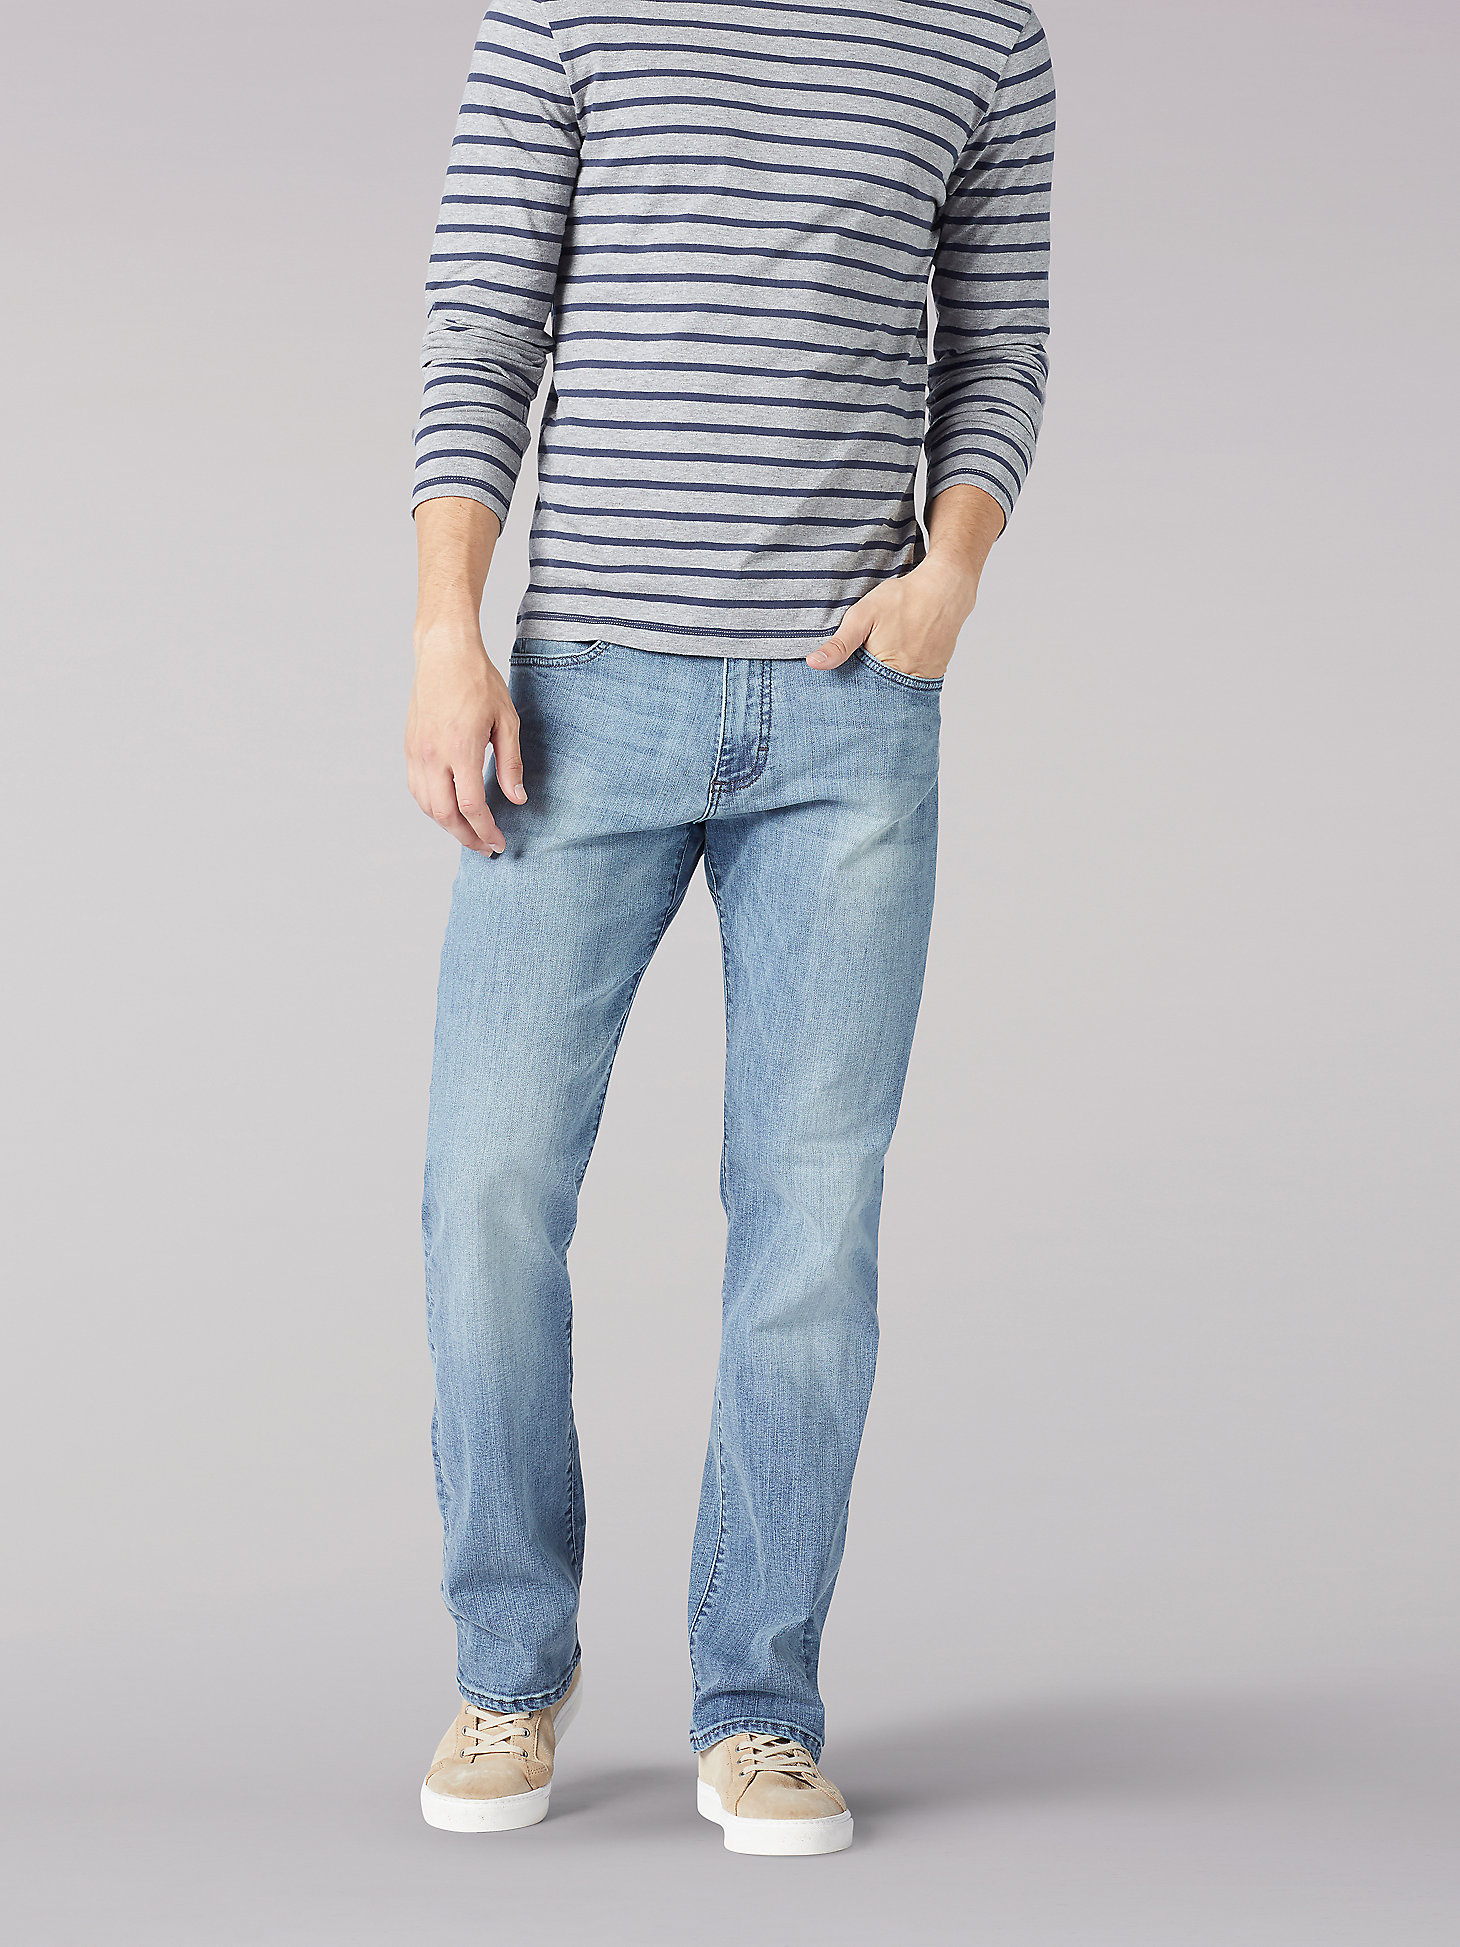 Men’s Extreme Motion Bootcut Jean in Theo main view